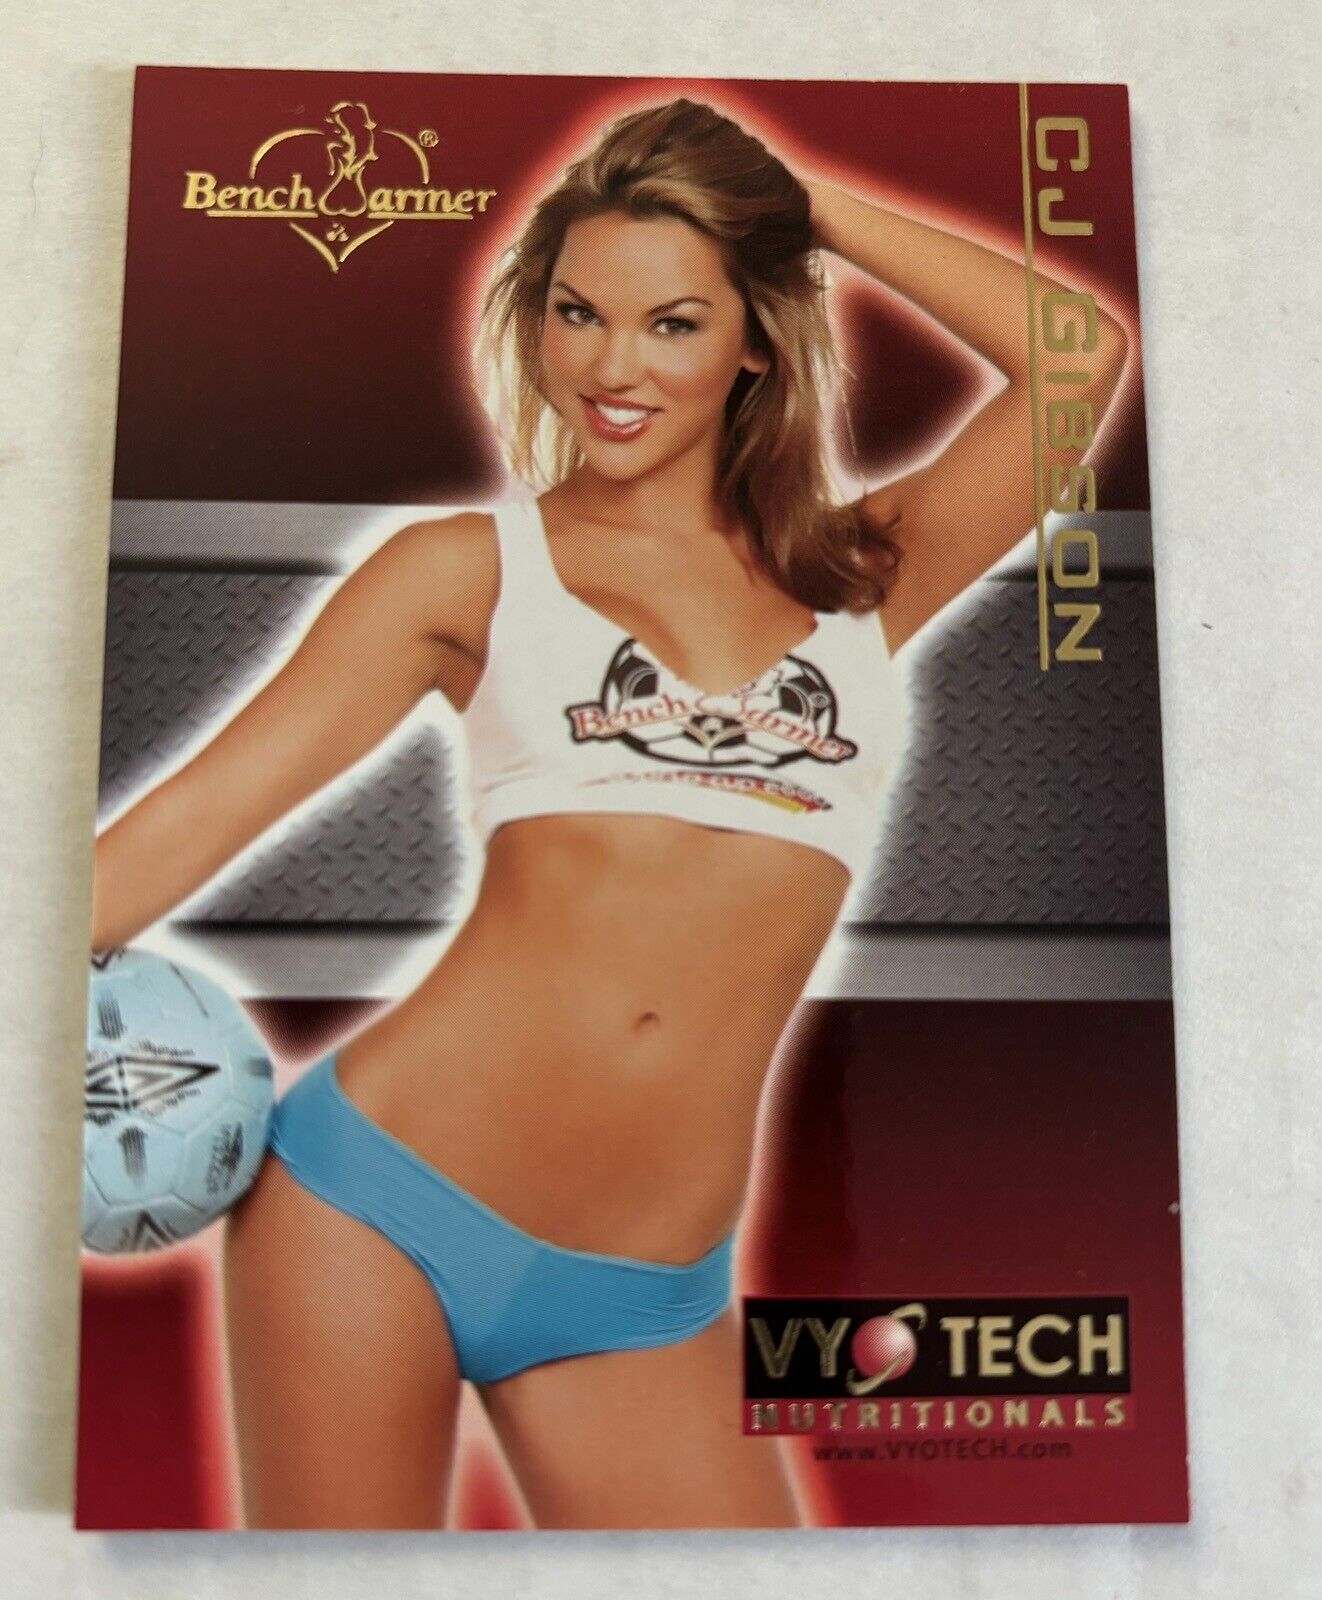 CJ Gibson - Benchwarmer 2006 Series 1 - High Number Chase VYOTECH - H95